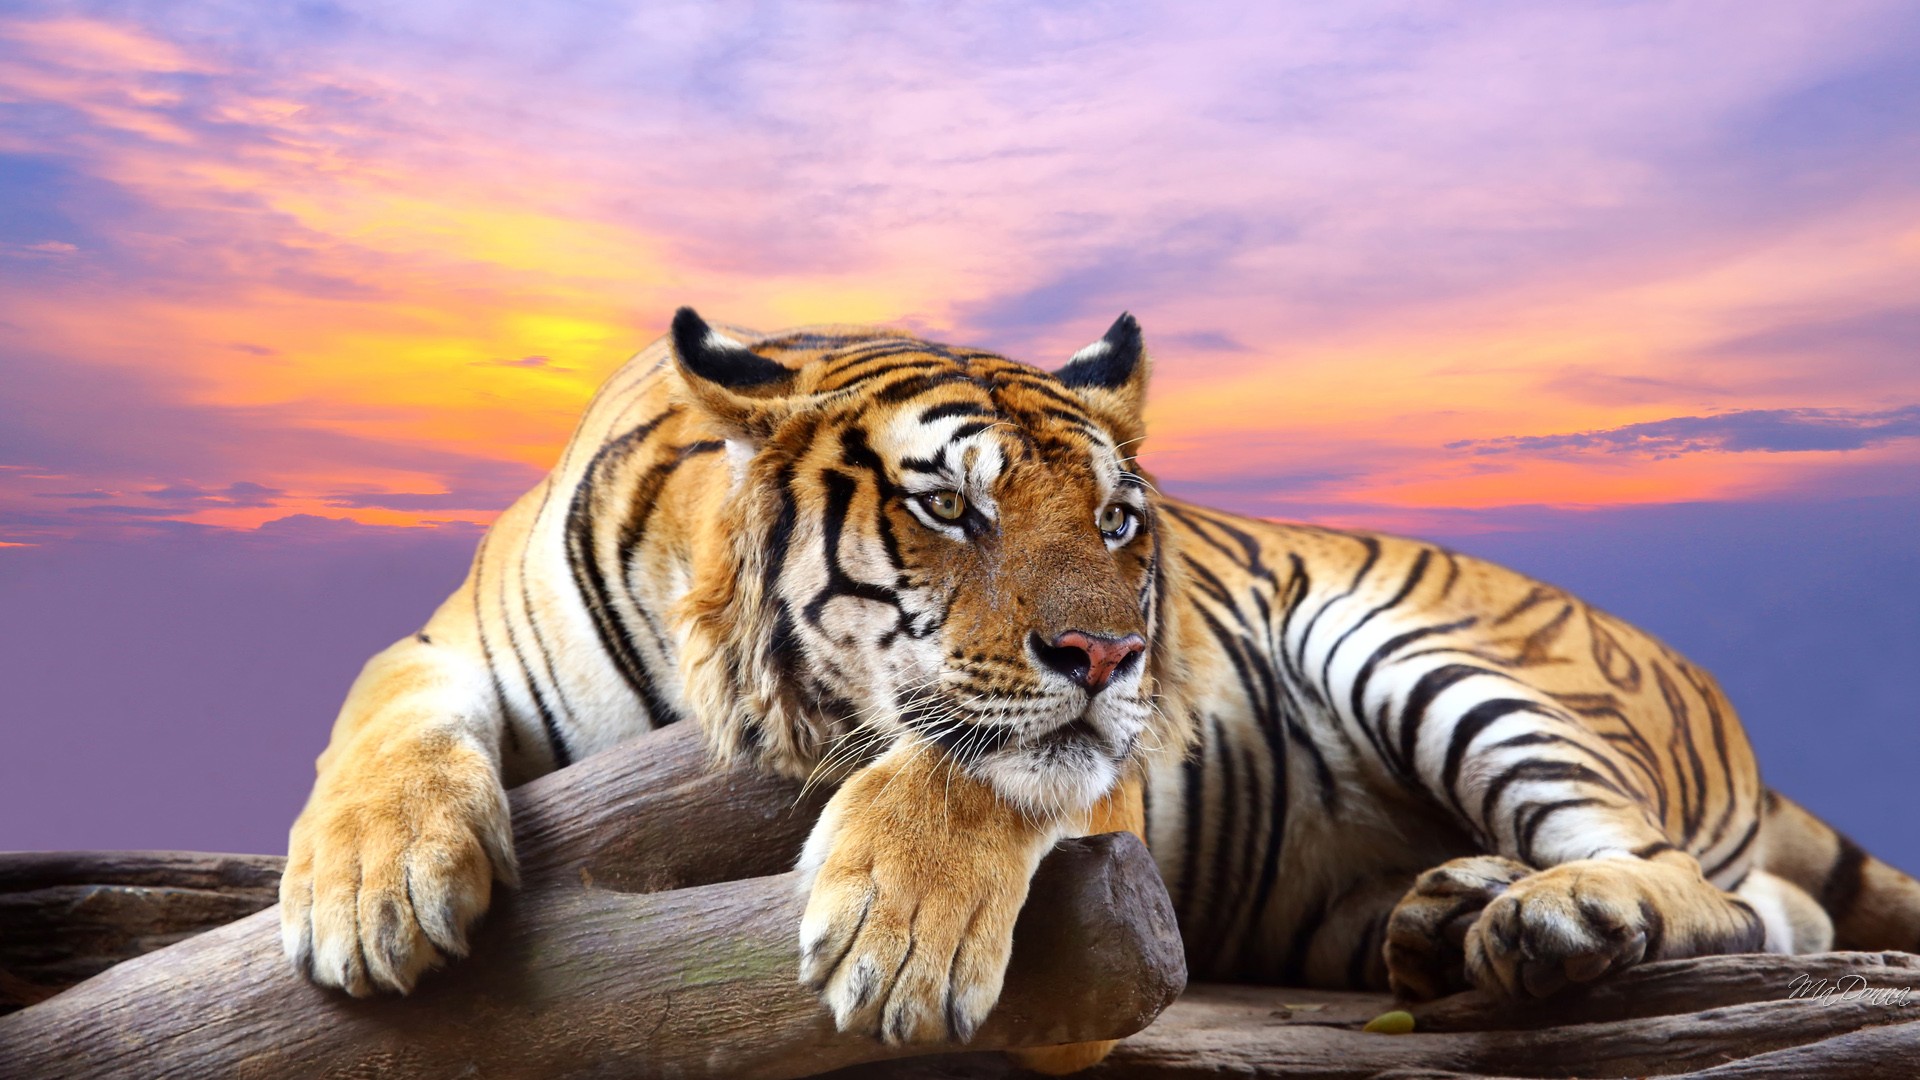 tiger the national animal of india